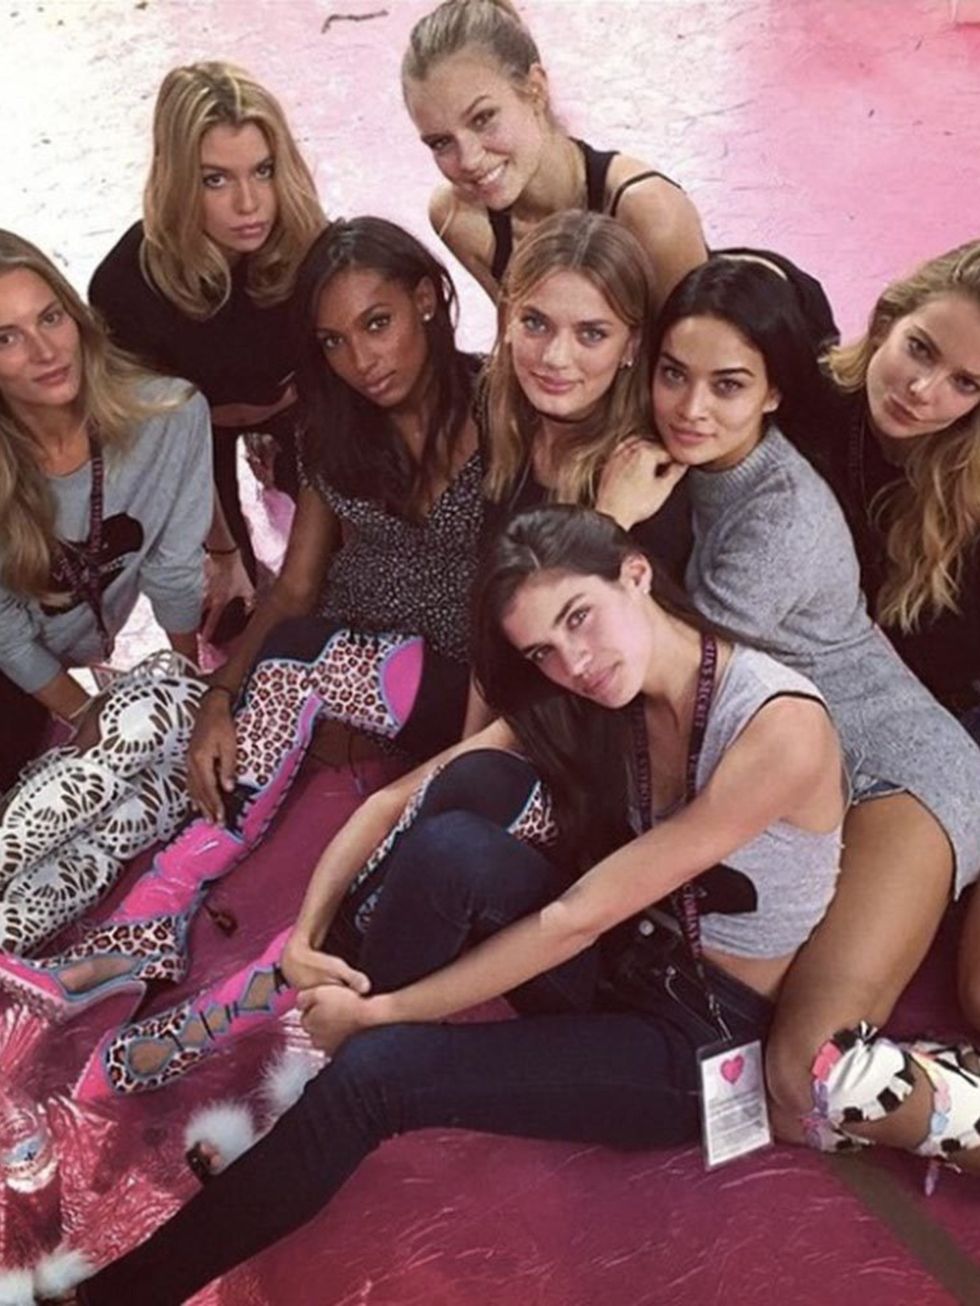 Victoria's Secret Show @ victoriassecret
Practice makes perfect! The girls take a break after a long day at rehearsals. #VSFashionShow #regram @sarasampaio #ButCanWeBorrowThoseShoes